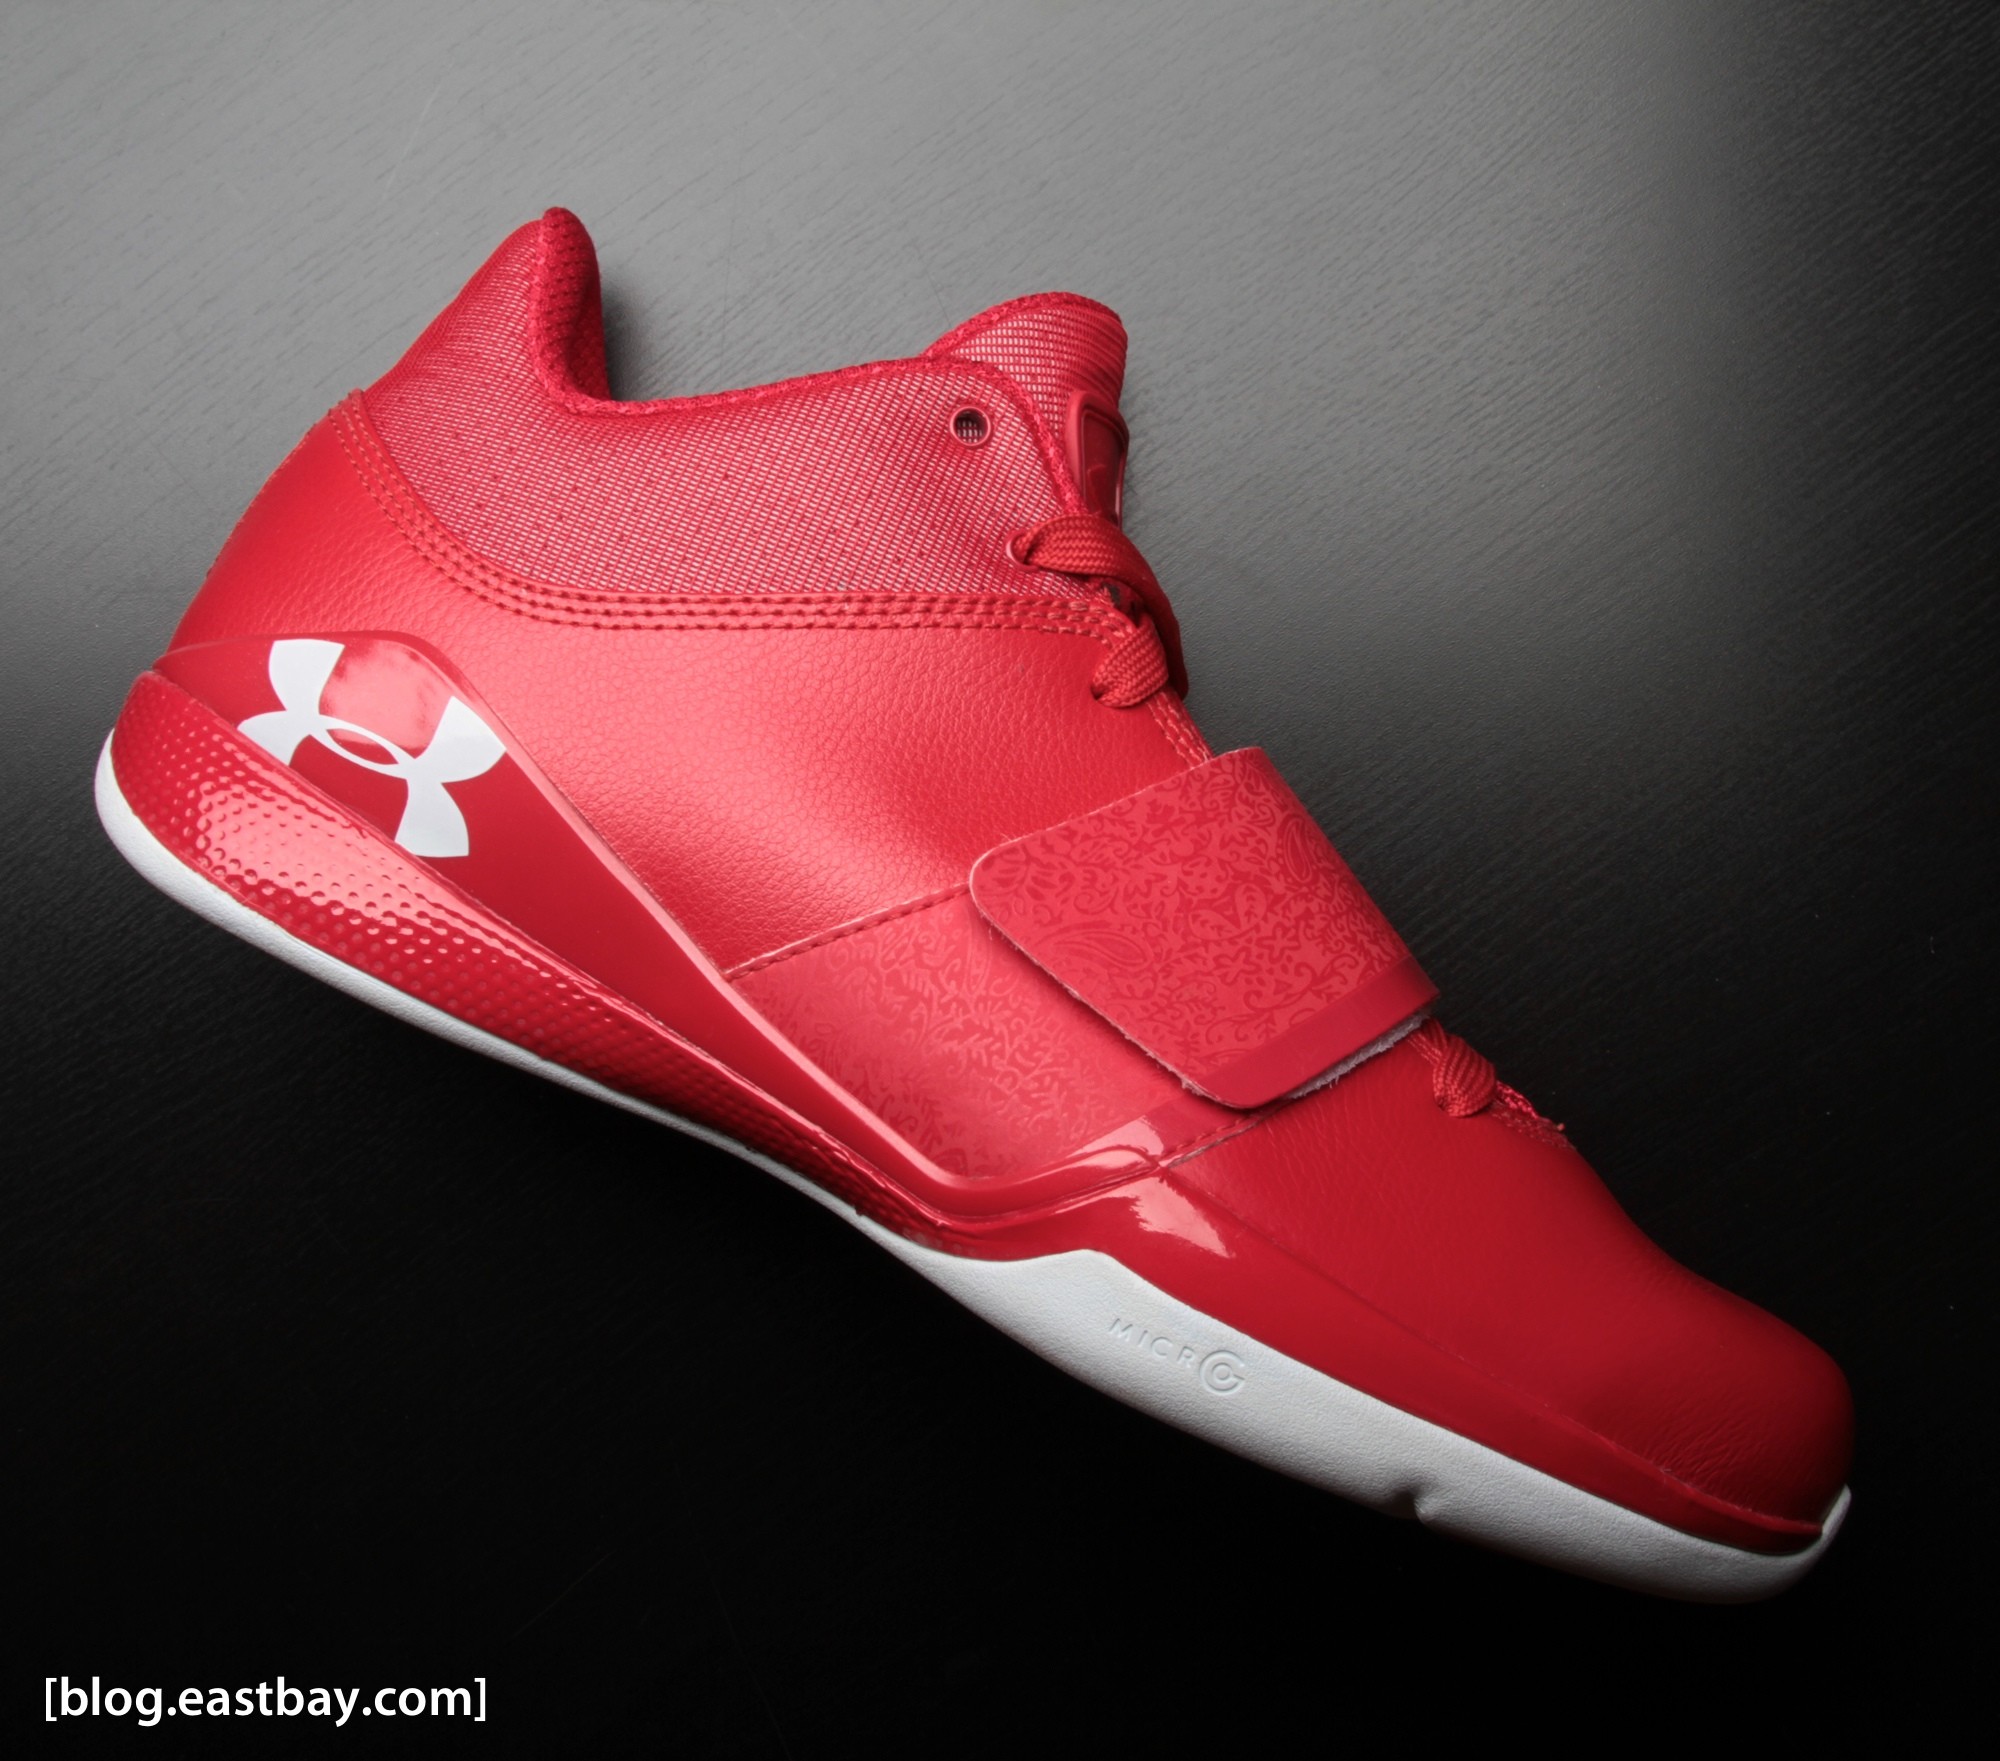 2000x1761 Available now: Under Armour Micro G Bloodline – Compton Red